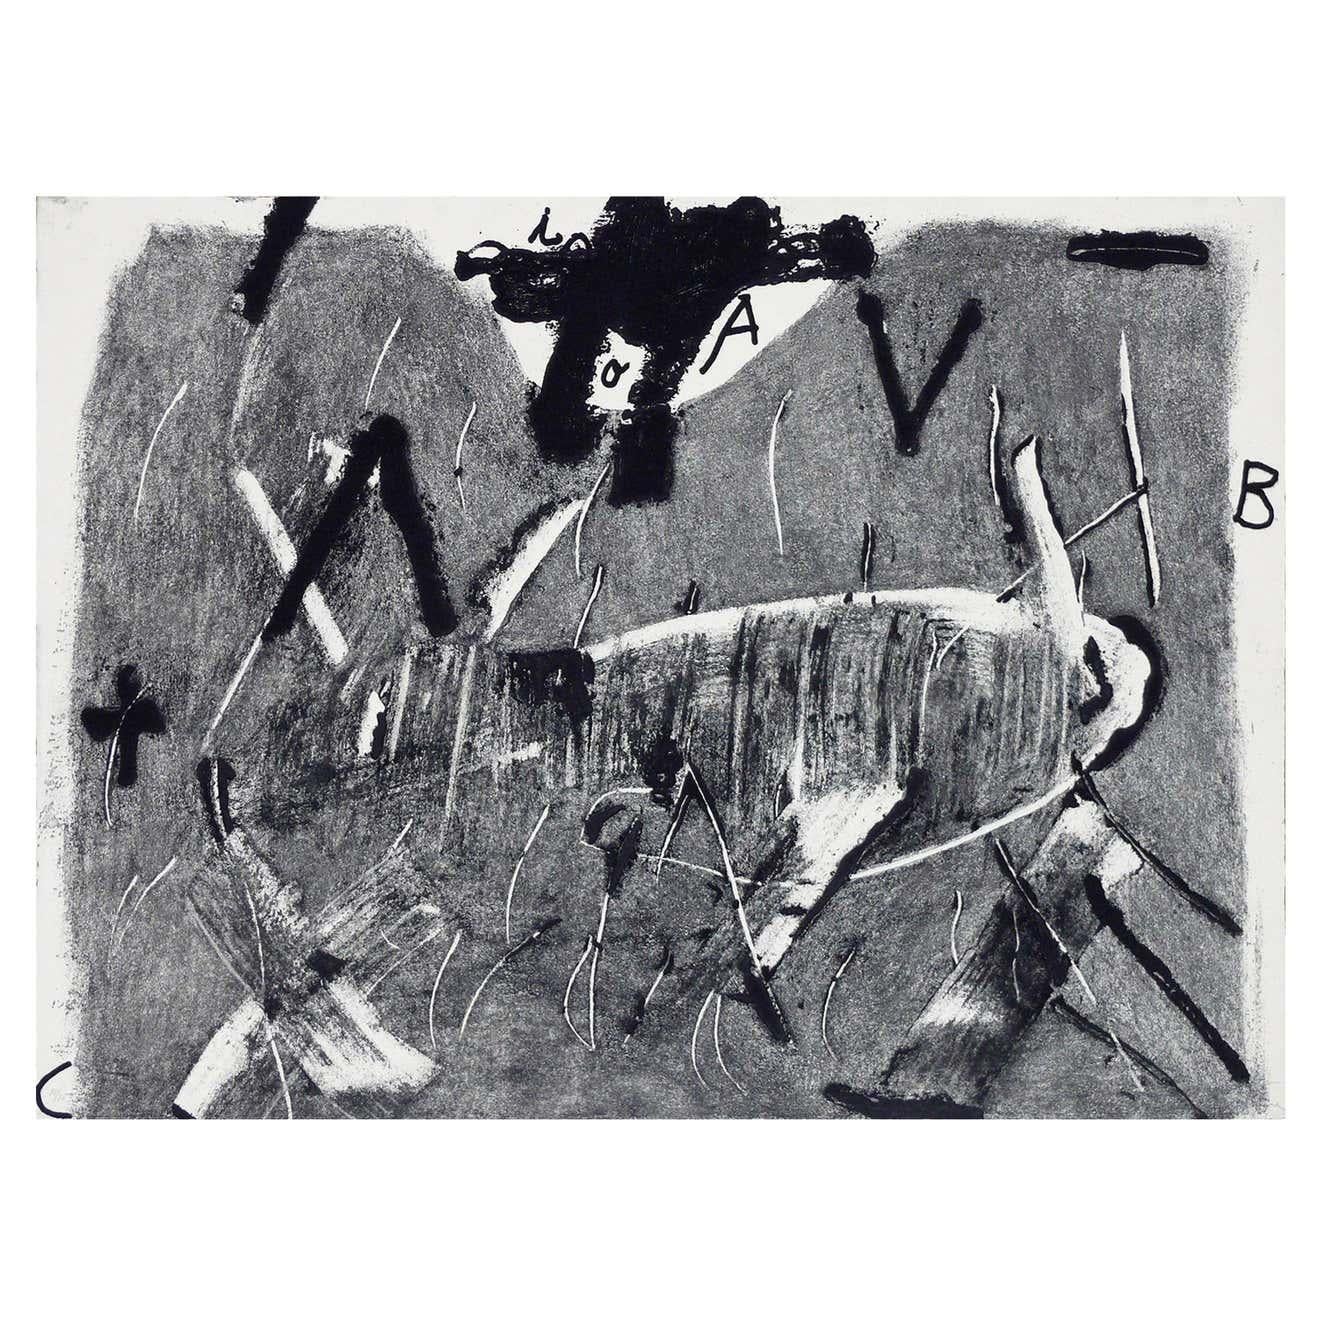 'Lletres i Gris' etching by Antoni Tàpies, 1976.

Etching with etching, drypoint and additive techniques on Guarro paper.

Signed and numbered. Limited edition of 75 copies.

In original good conditions.

Born in Barcelona, Antoni Tàpies